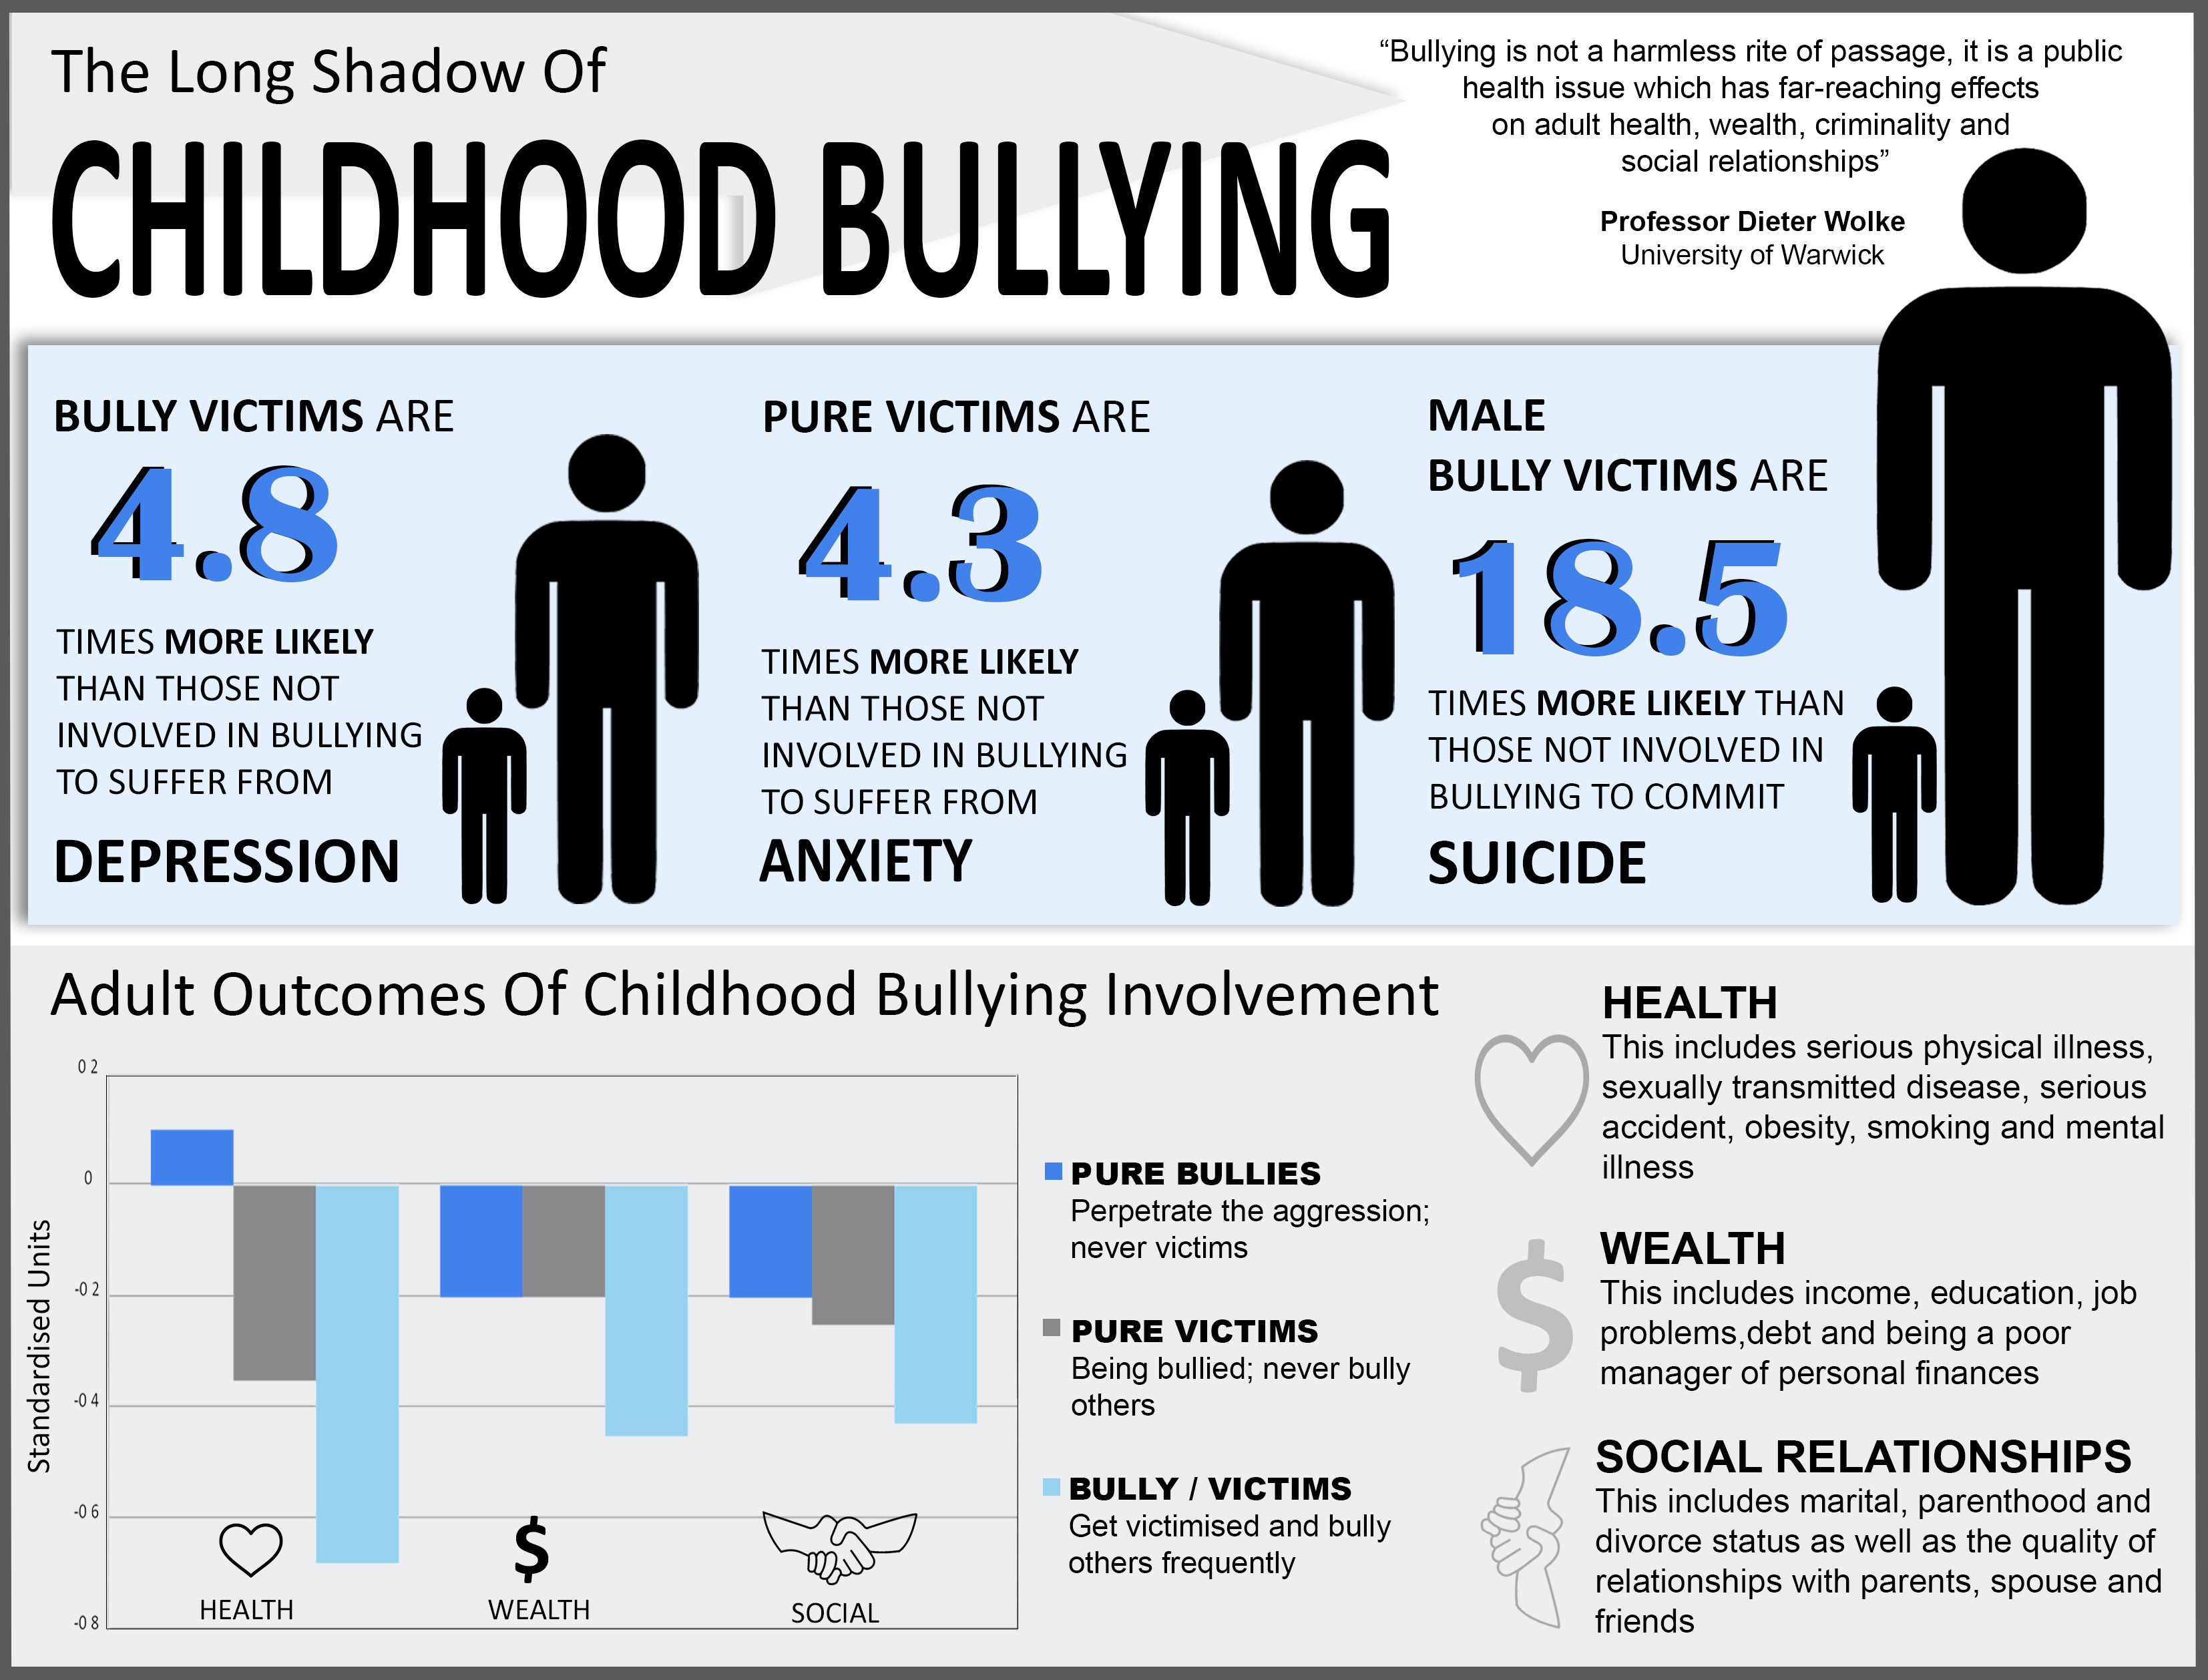 Impact of Bullying in Childhood on Adult Health, Wealth, Crime